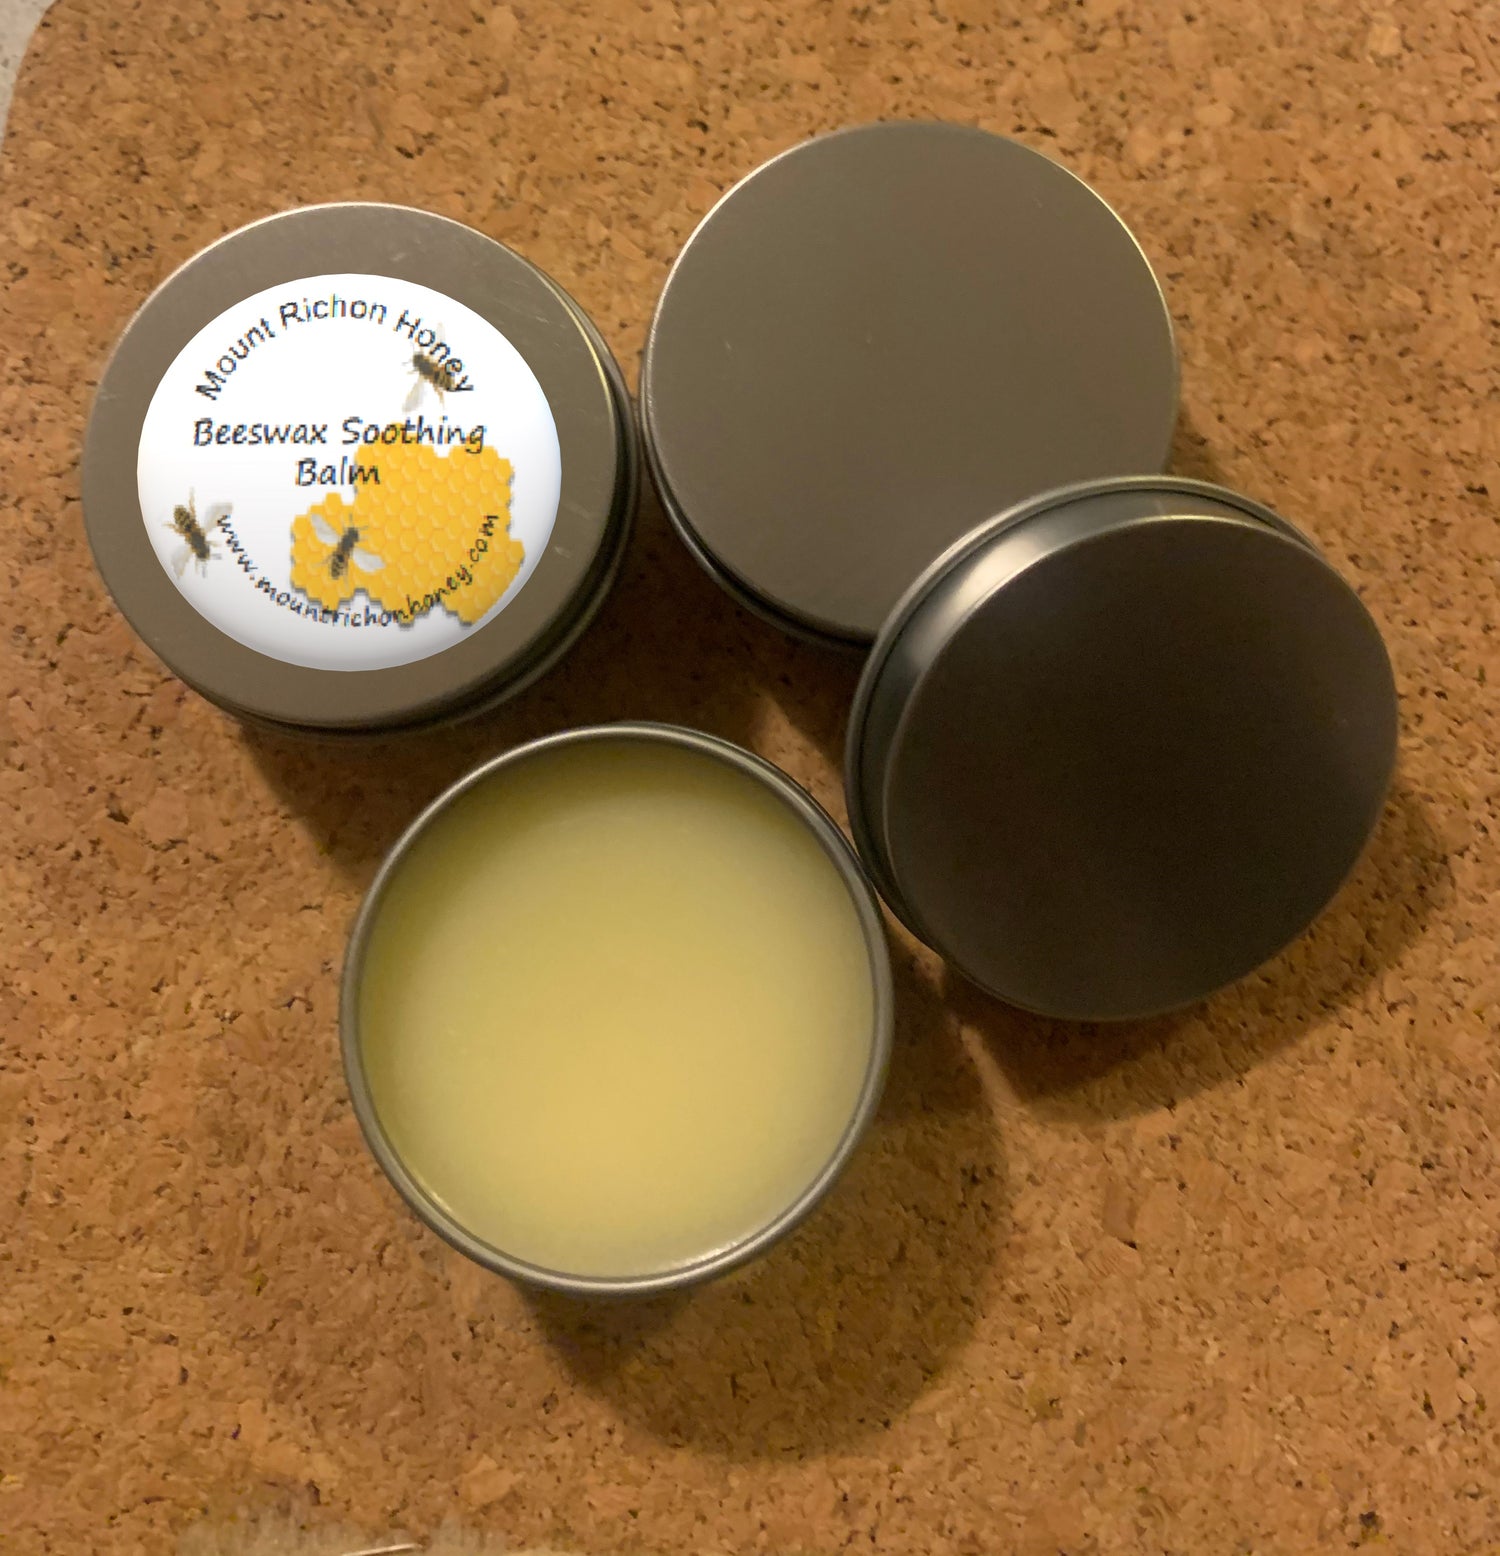 Beeswax Soothing Balm